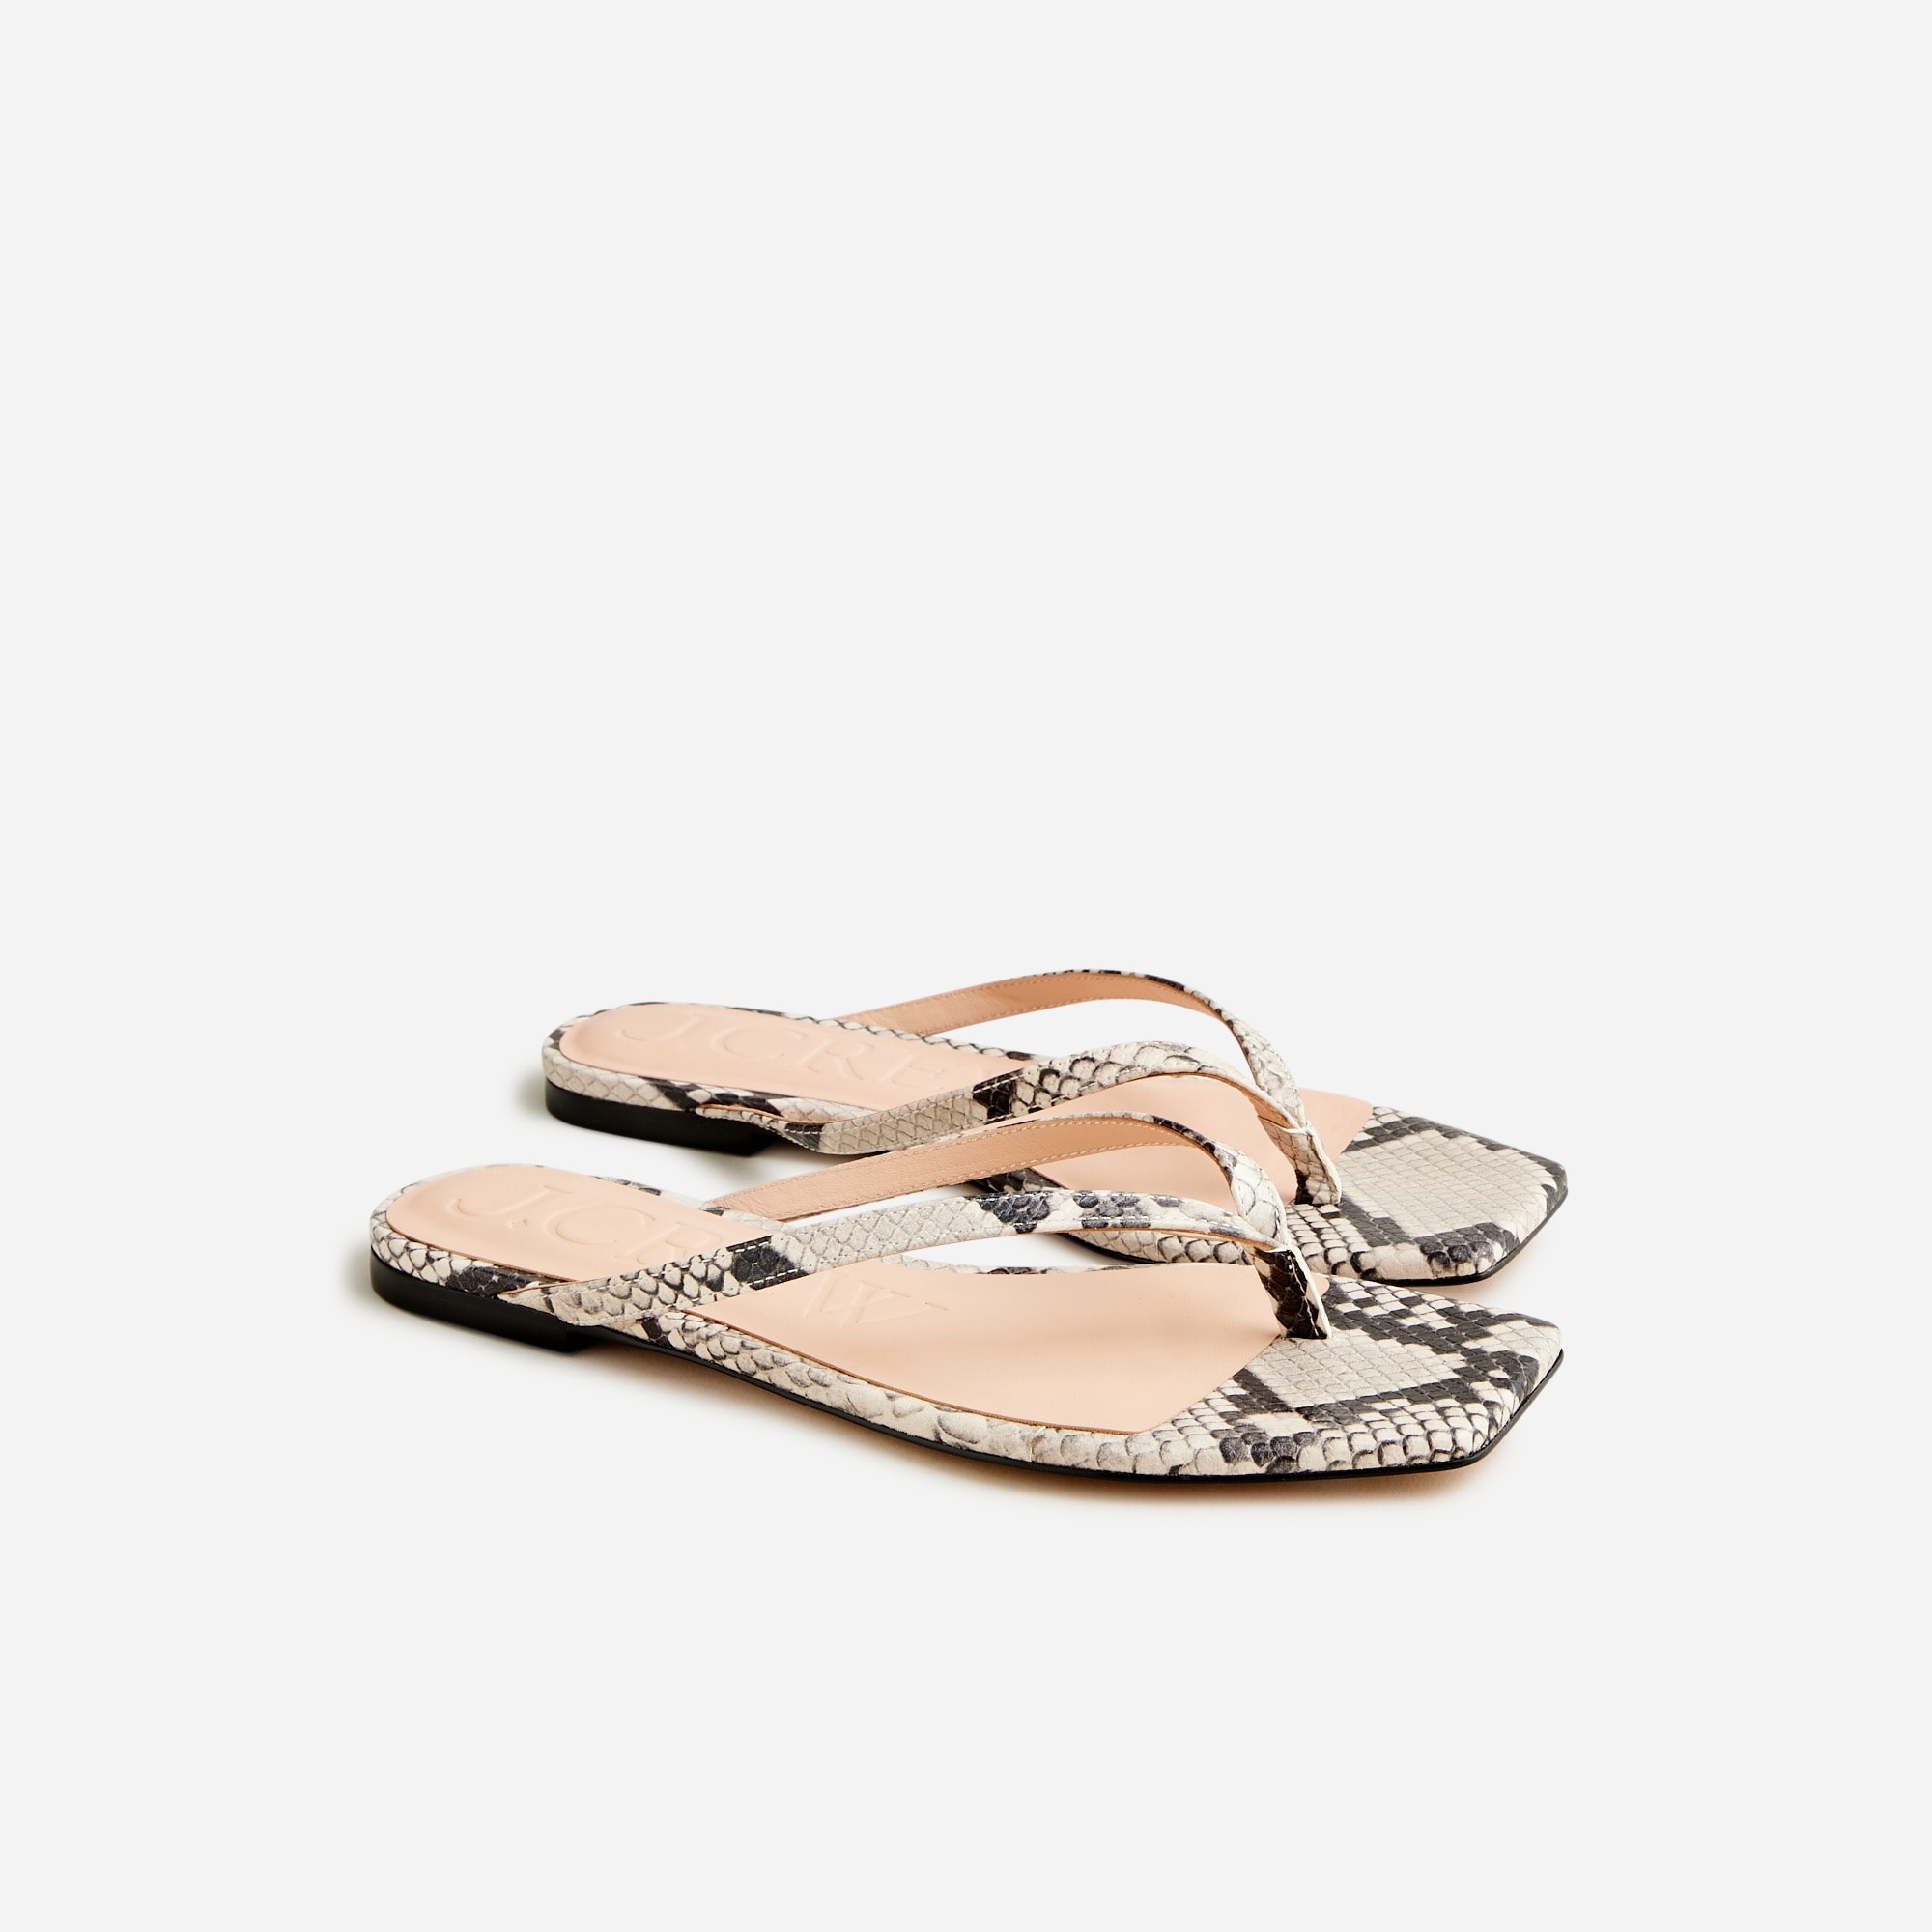  New Capri thong sandals in snake-embossed leather